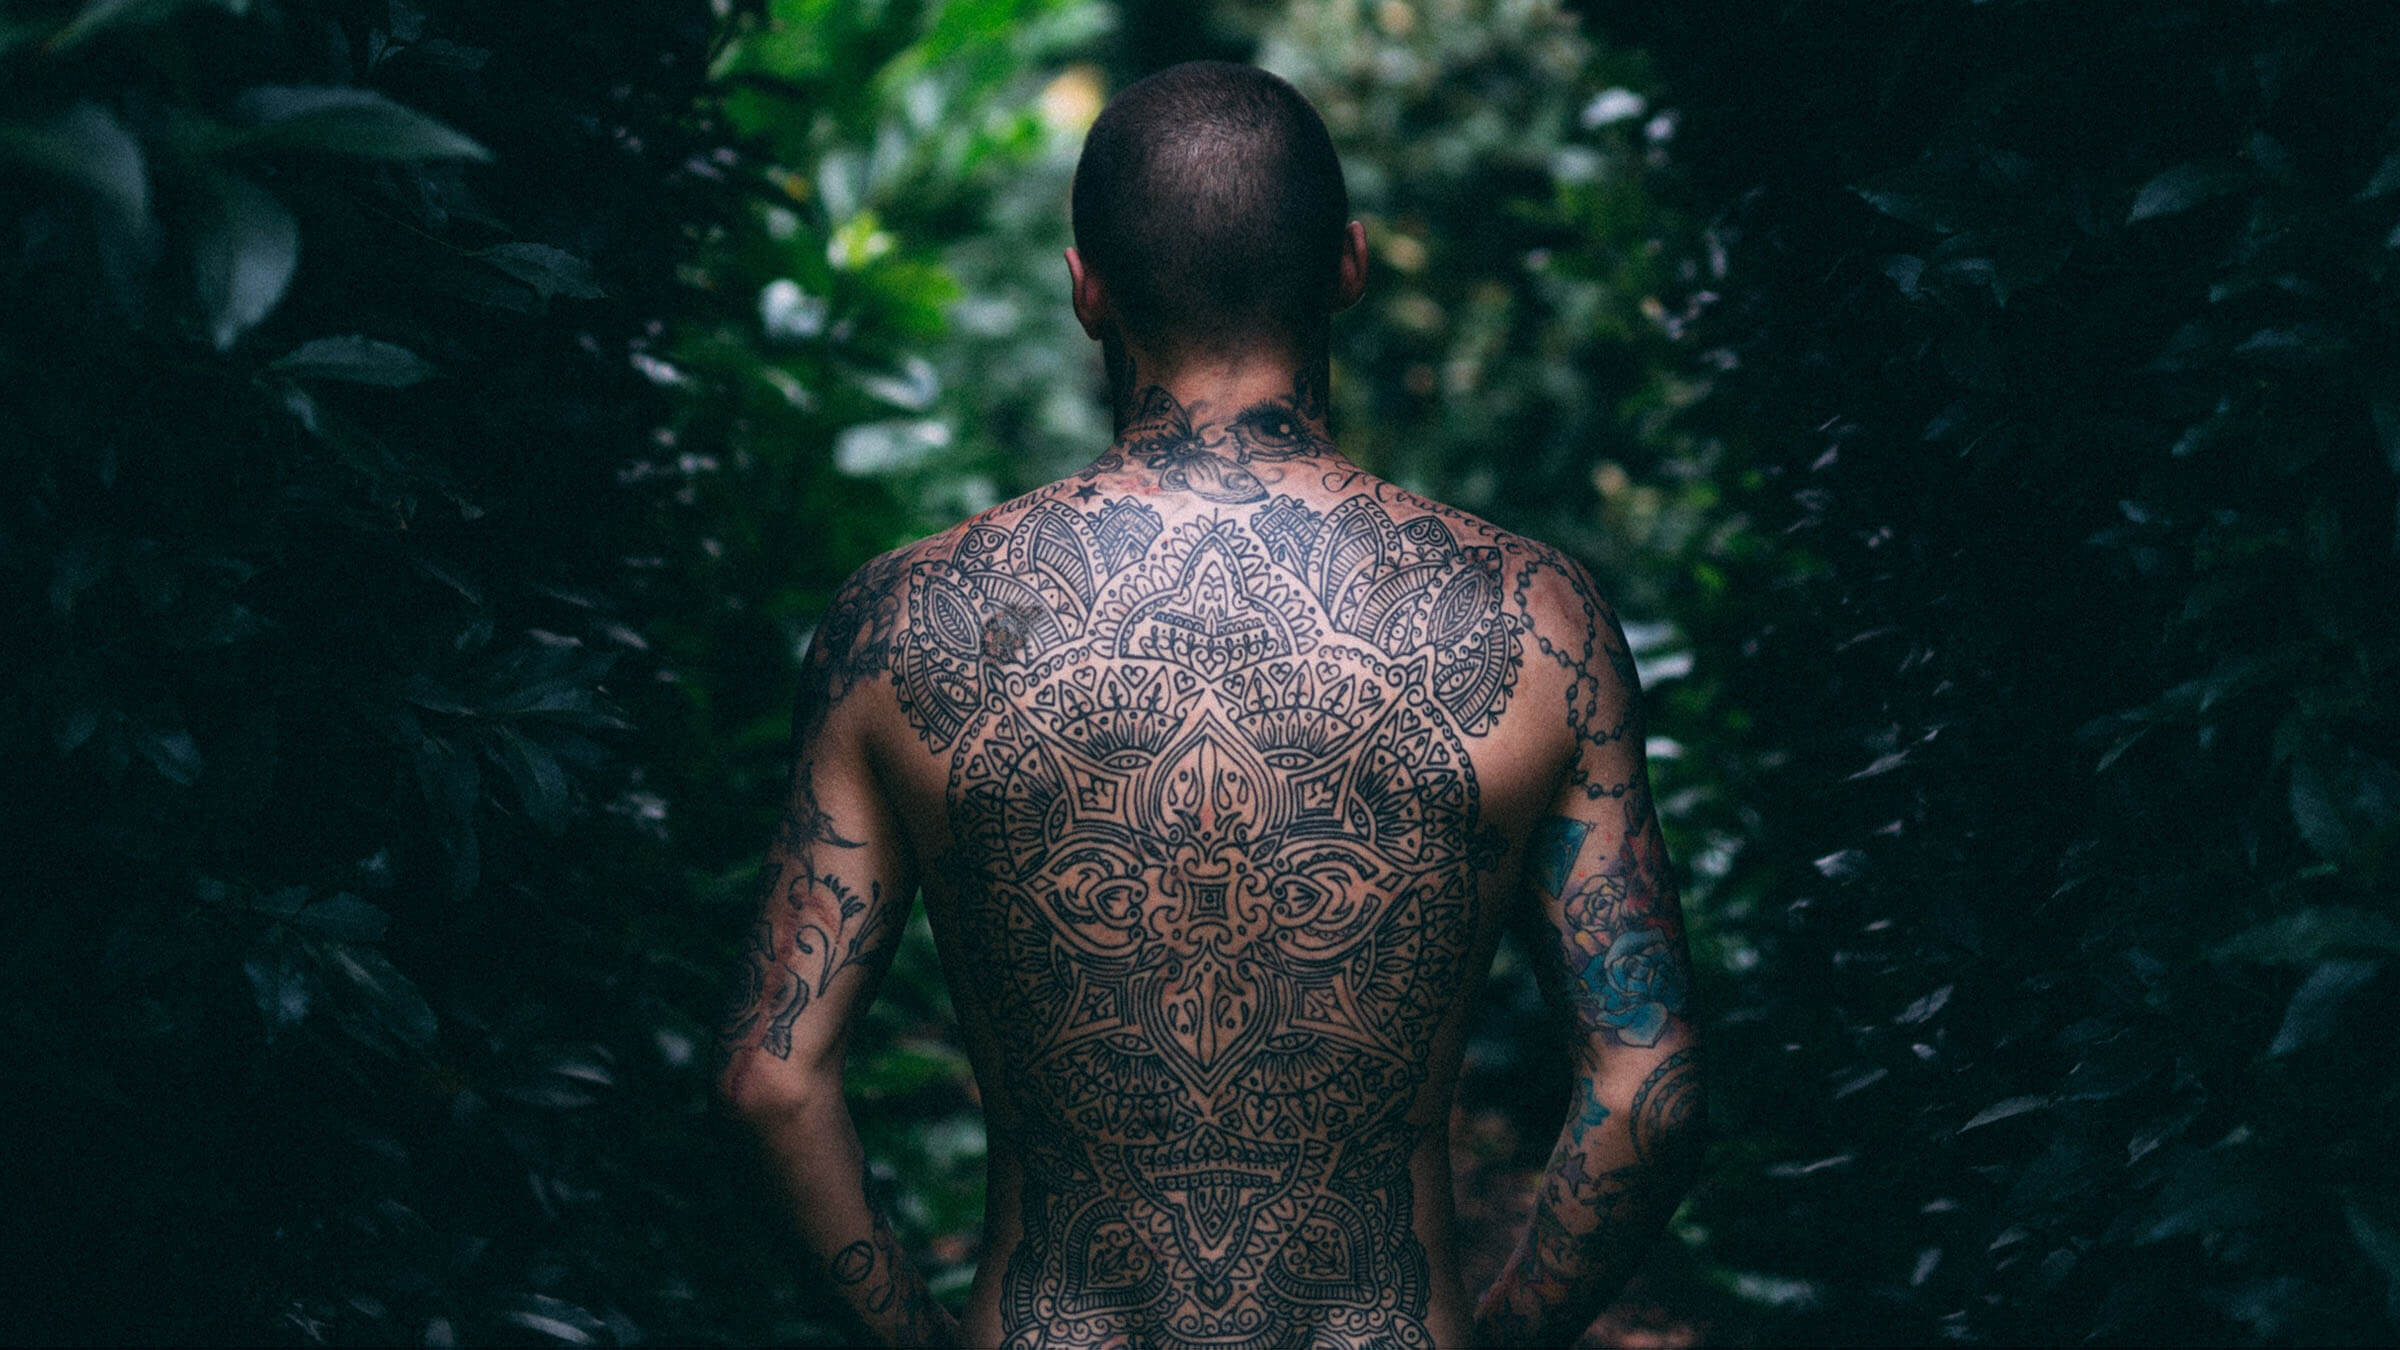 Getting Inked: Top 12 Cool Tattoo Styles